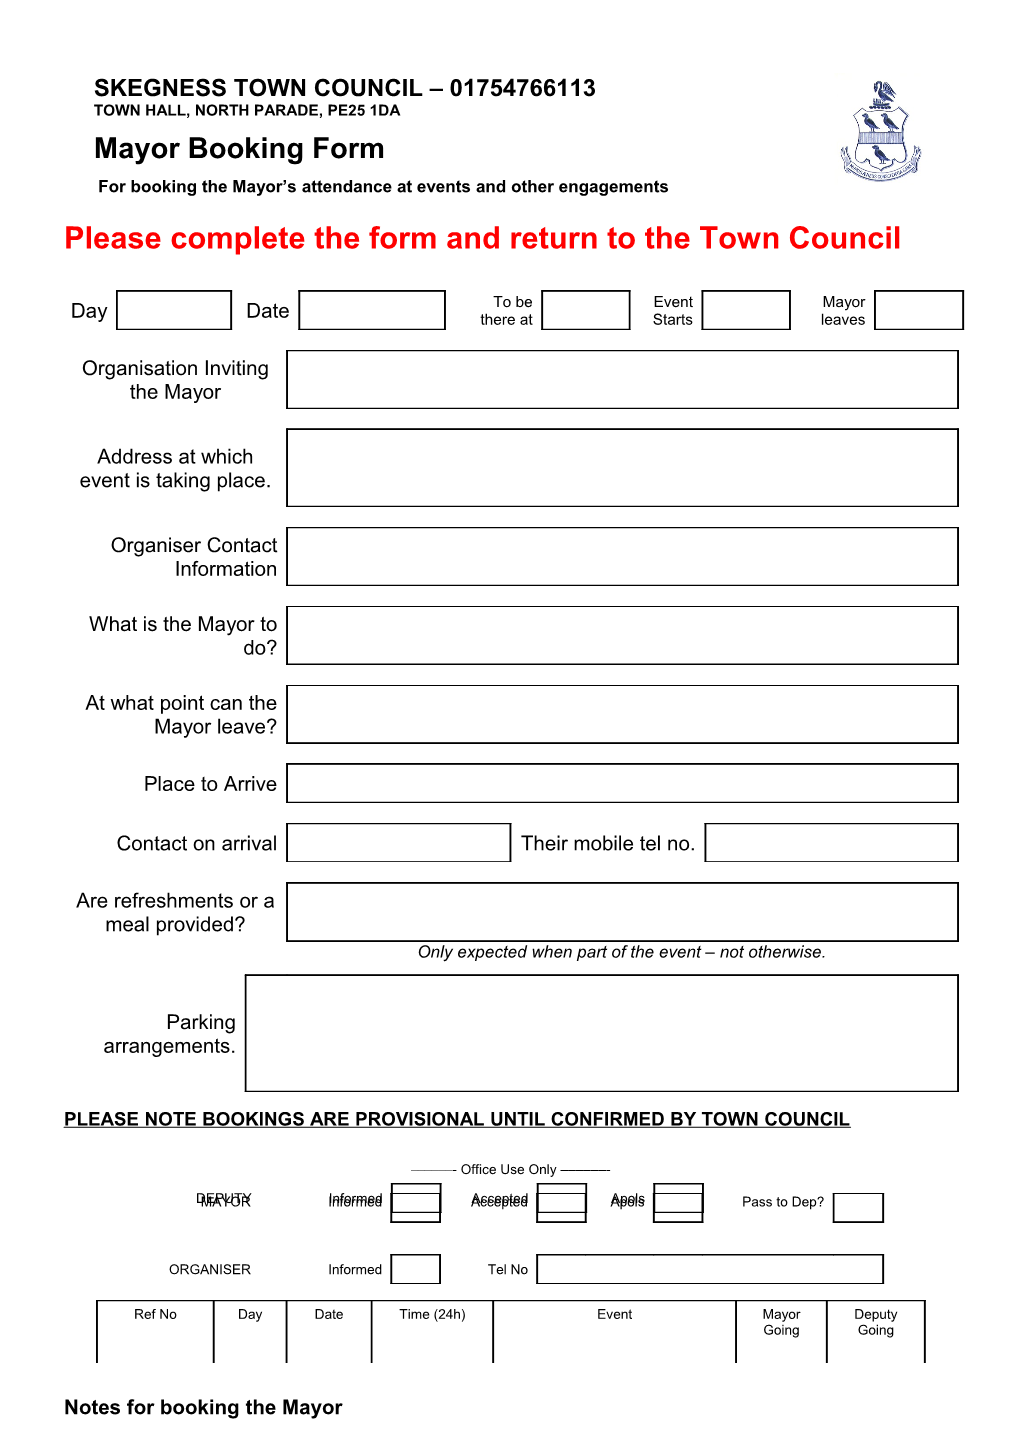 Please Complete the Form and Return to the Town Council